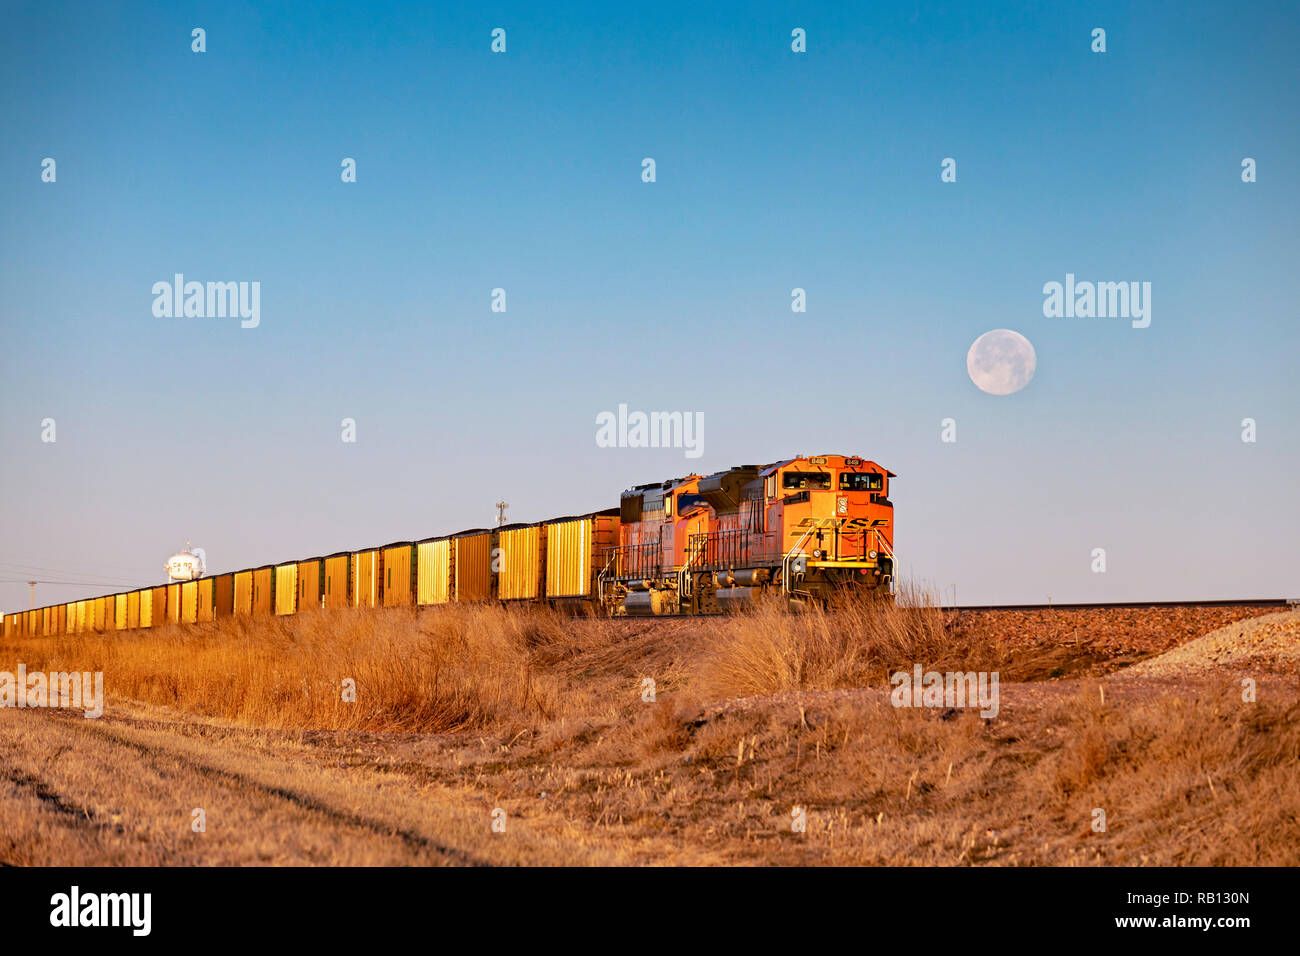 Cairo, Nebraska - A BNSF coal train in the sand hills of Nebraska. Each day, as many as 100 coal trains, each about a mile long, deliver coal from Wyo Stock Photo